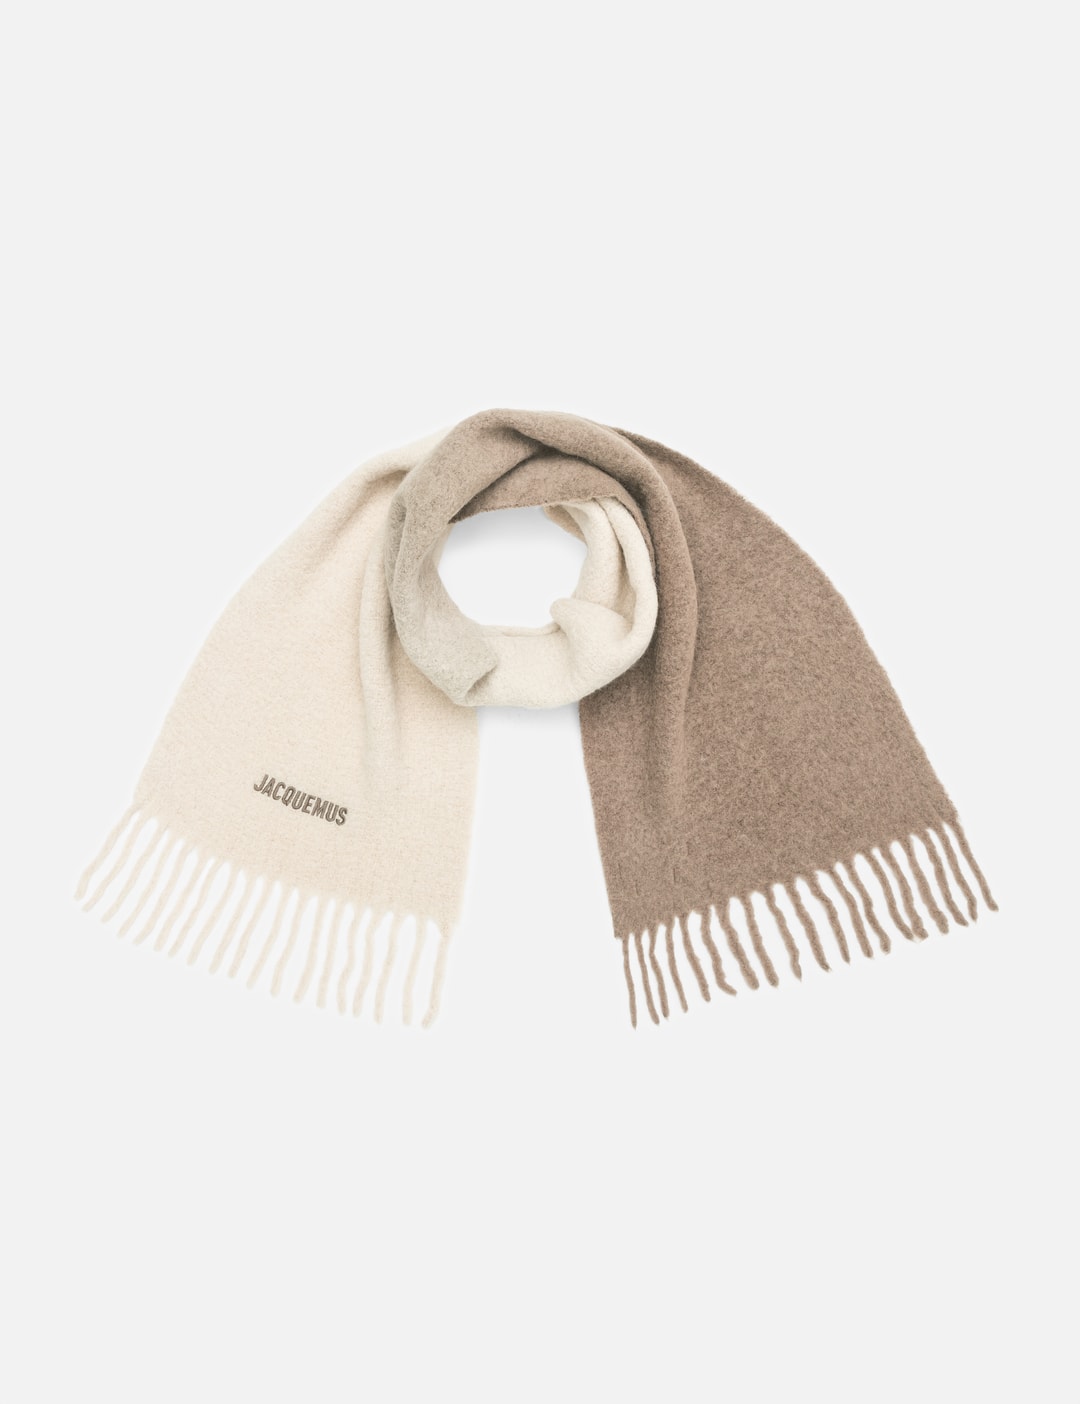 Jacquemus - L'ECHARPE MOISSON Gradient Scarf | HBX - Globally Curated ...